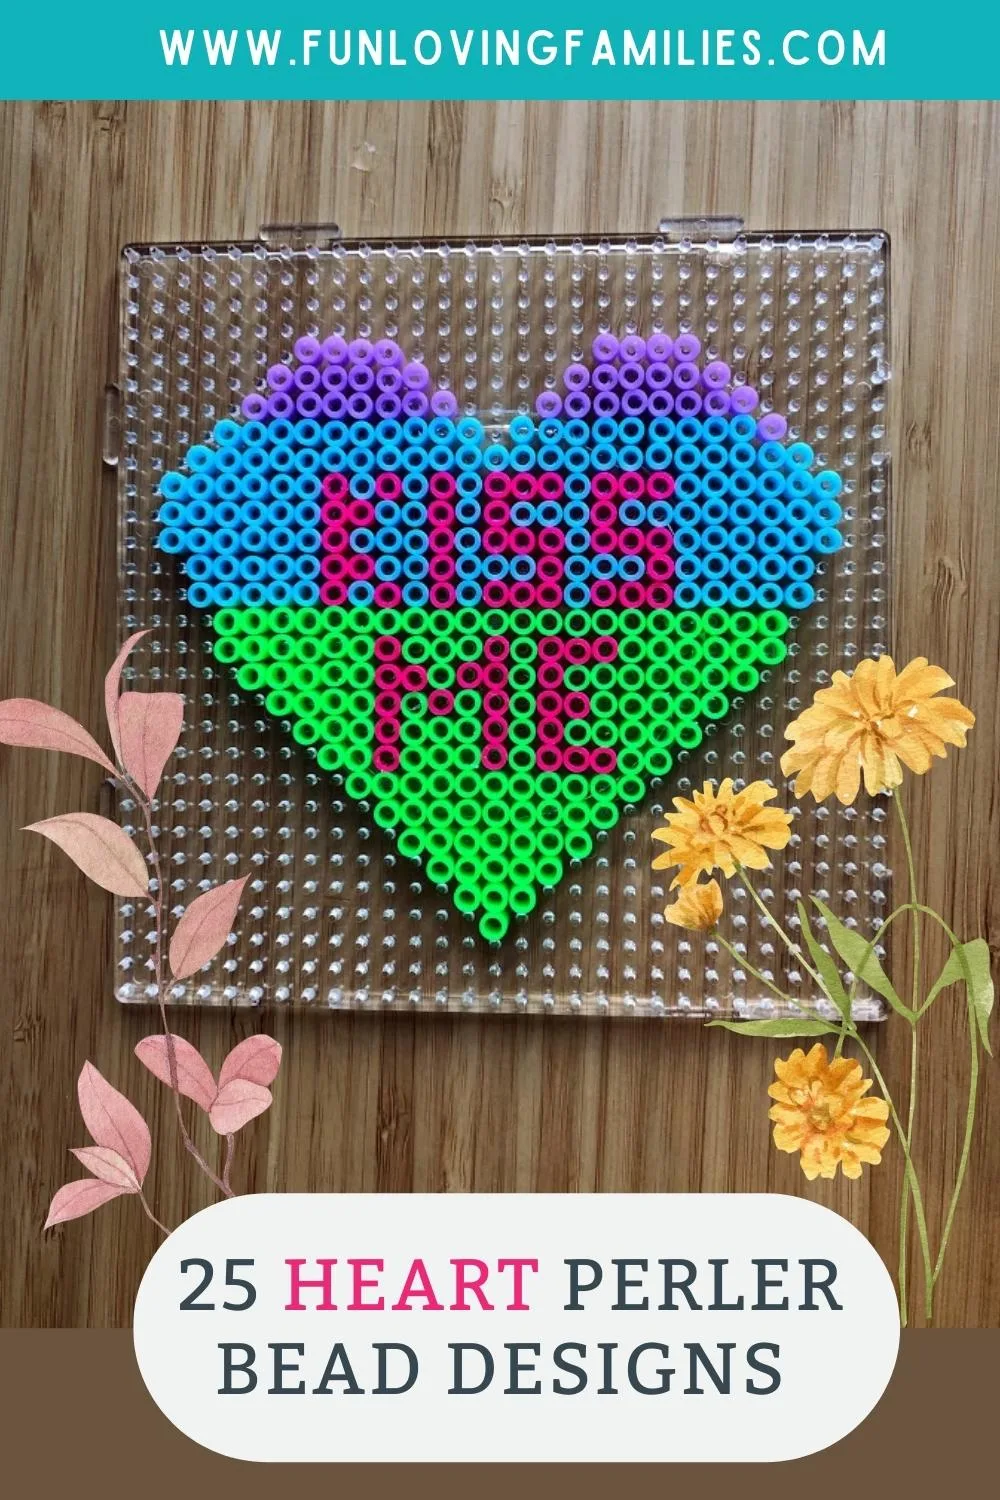 25 Heart Perler Bead Patterns, Designs and Ideas pin image